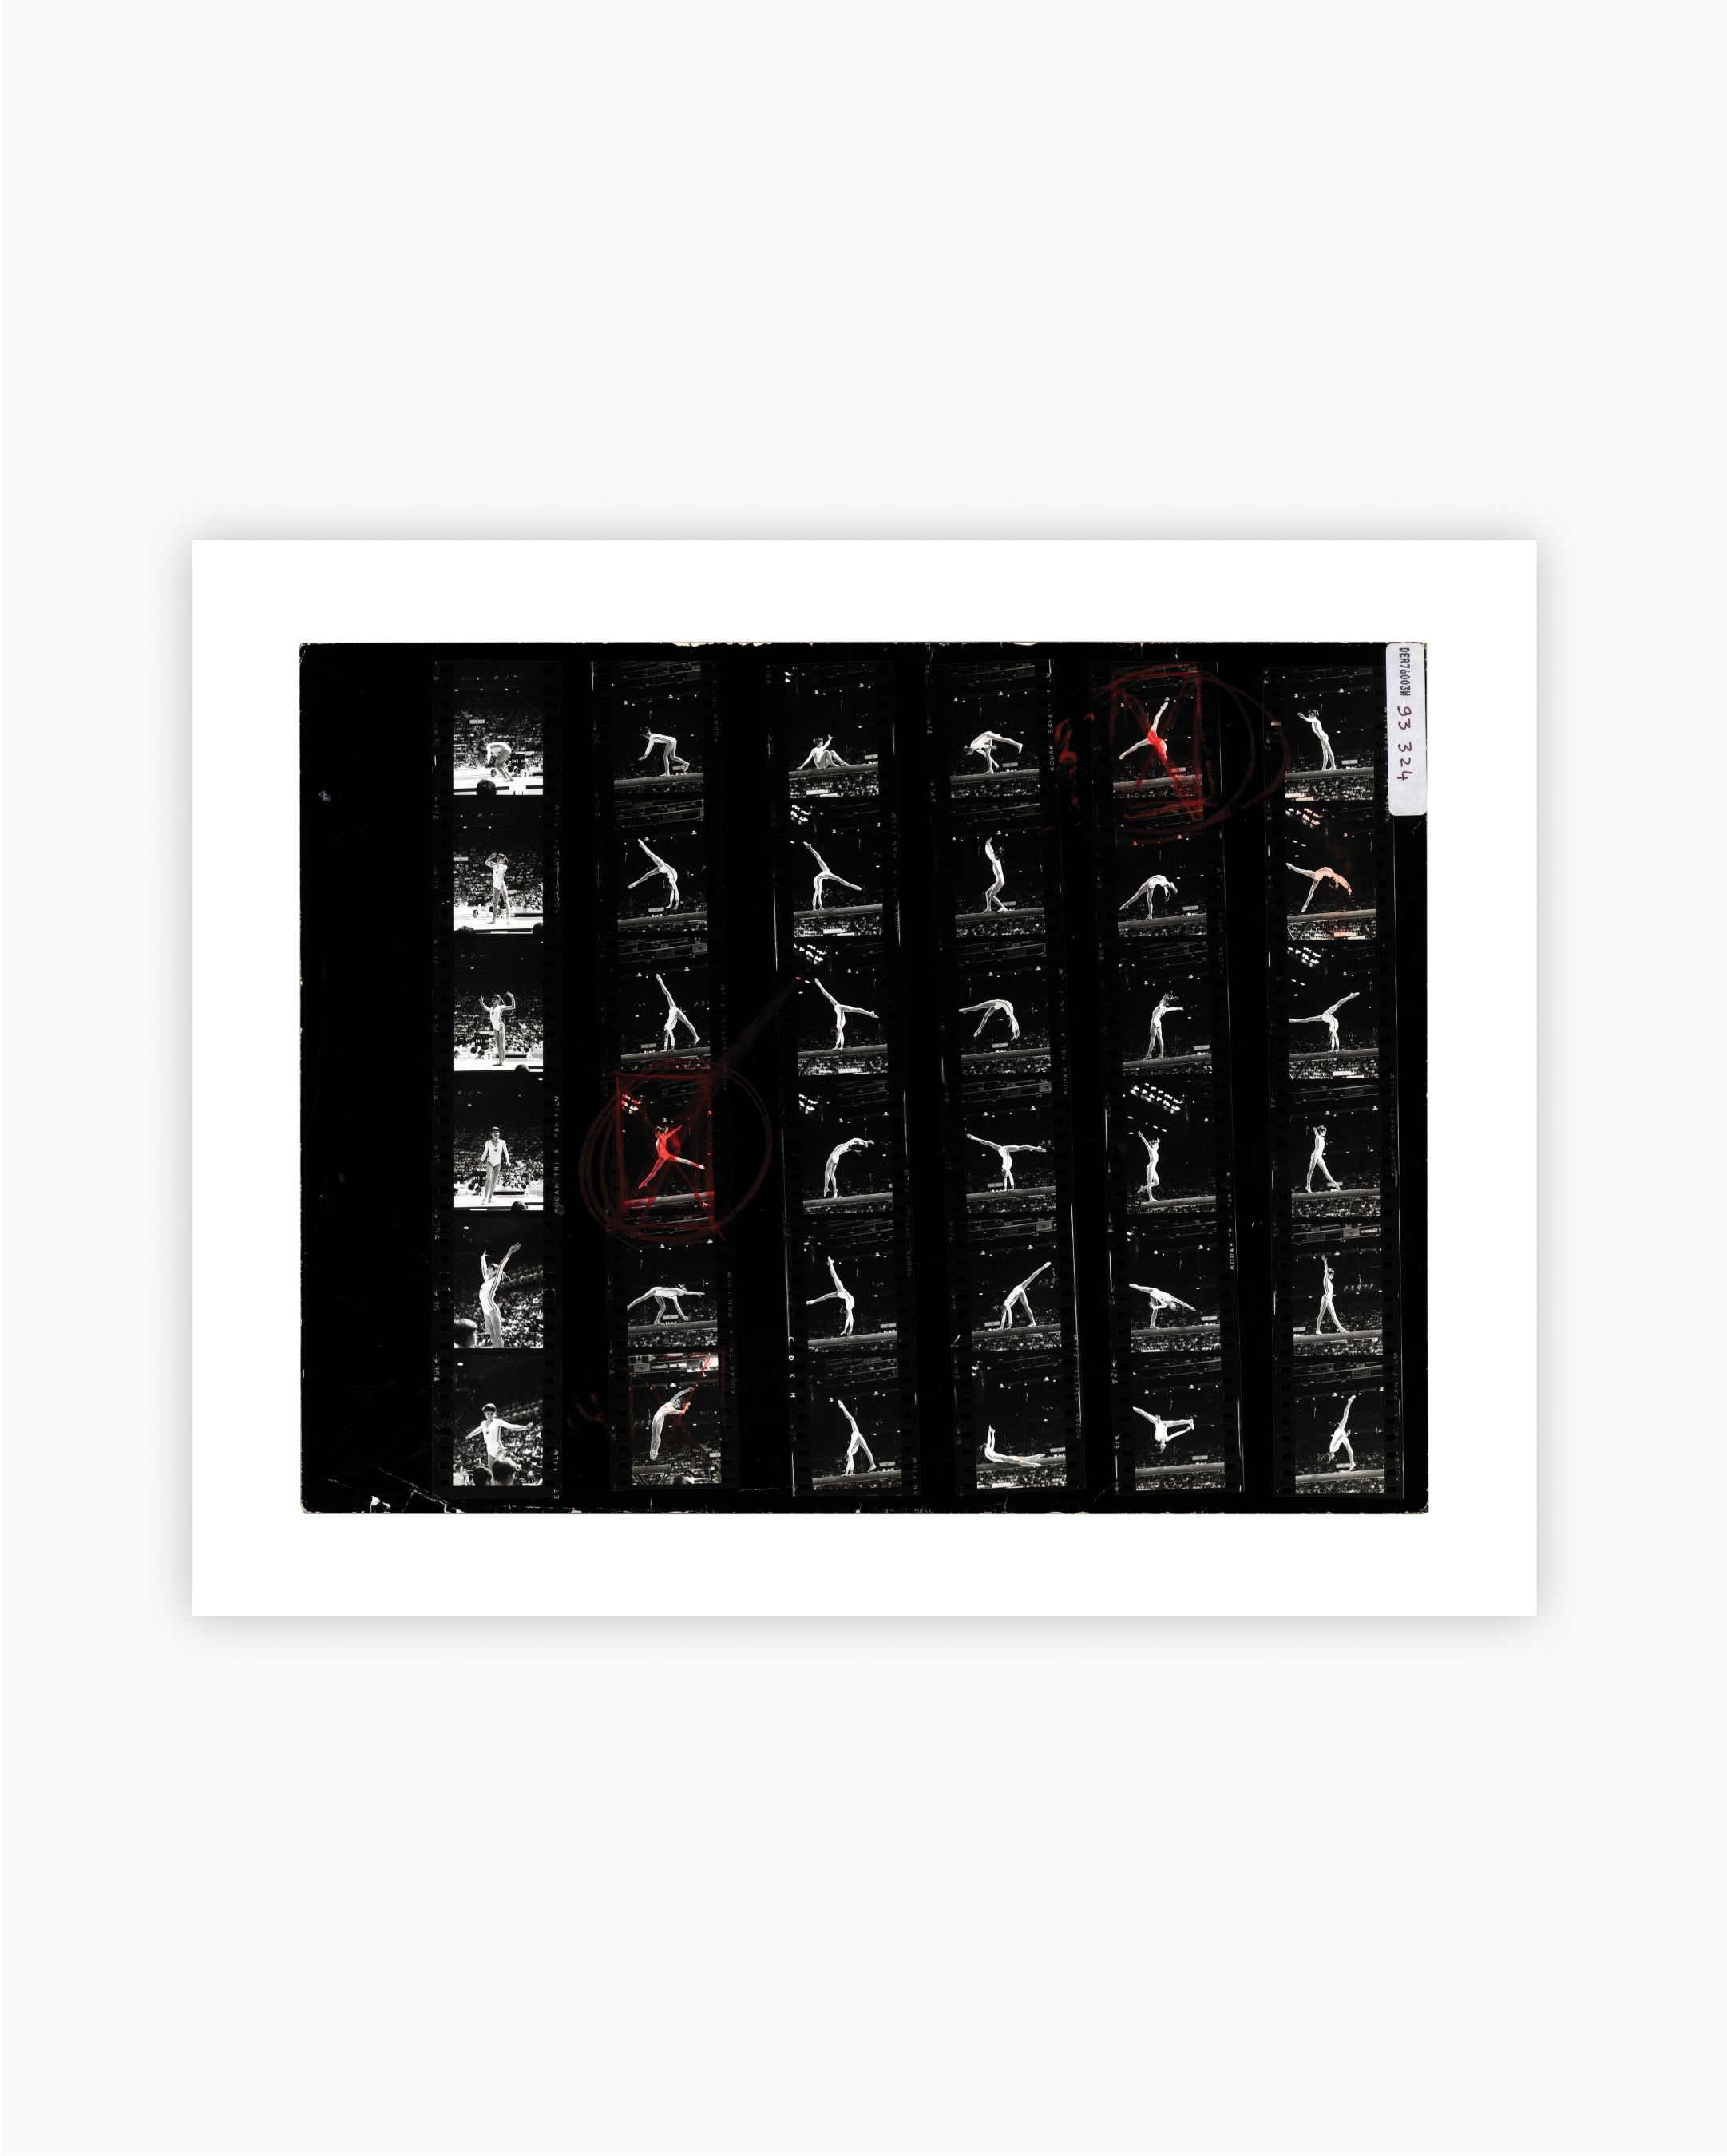 Contact Sheet Print: Olympic Games. Montreal, 1976